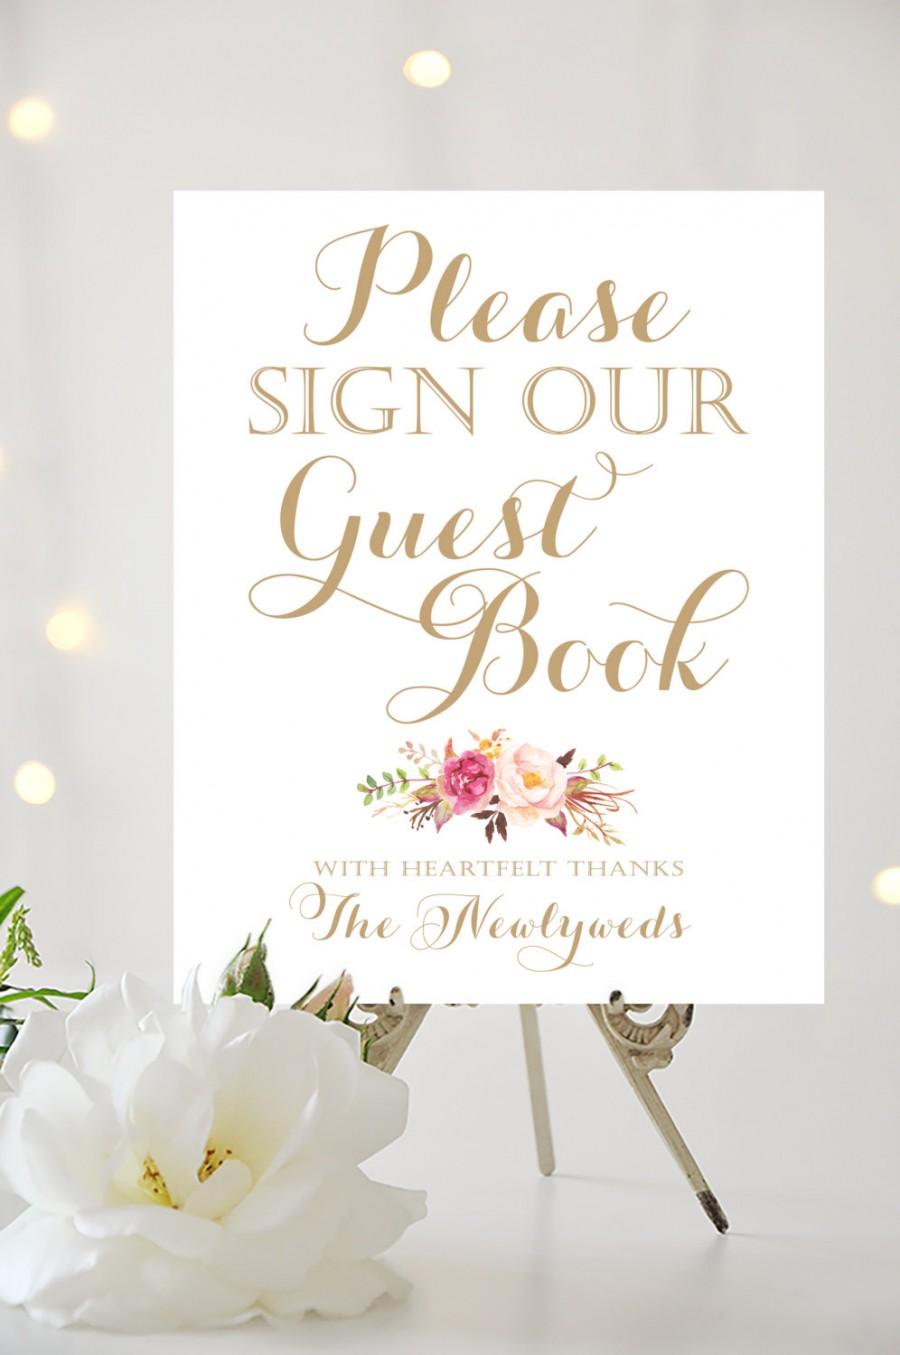 Wedding - Wedding Sign - Please Sign Our Guestbook - 8 x 10 - DIY Printable - Vintage antique gold - PDF and JPG files - Instant Download